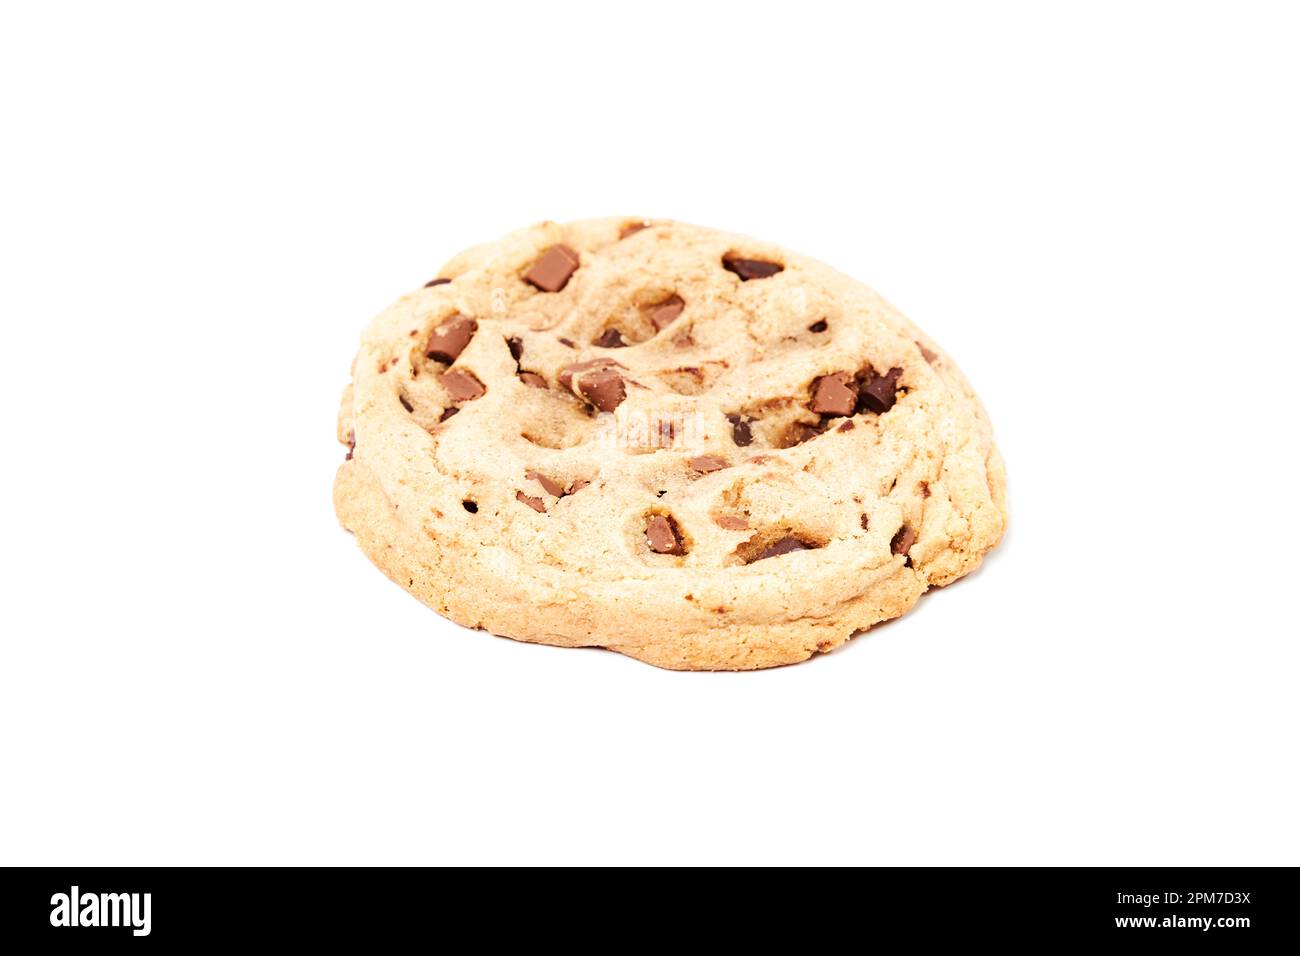 Chocolate chip cookie isolated on white background. sweet food. unhealthy food Stock Photo